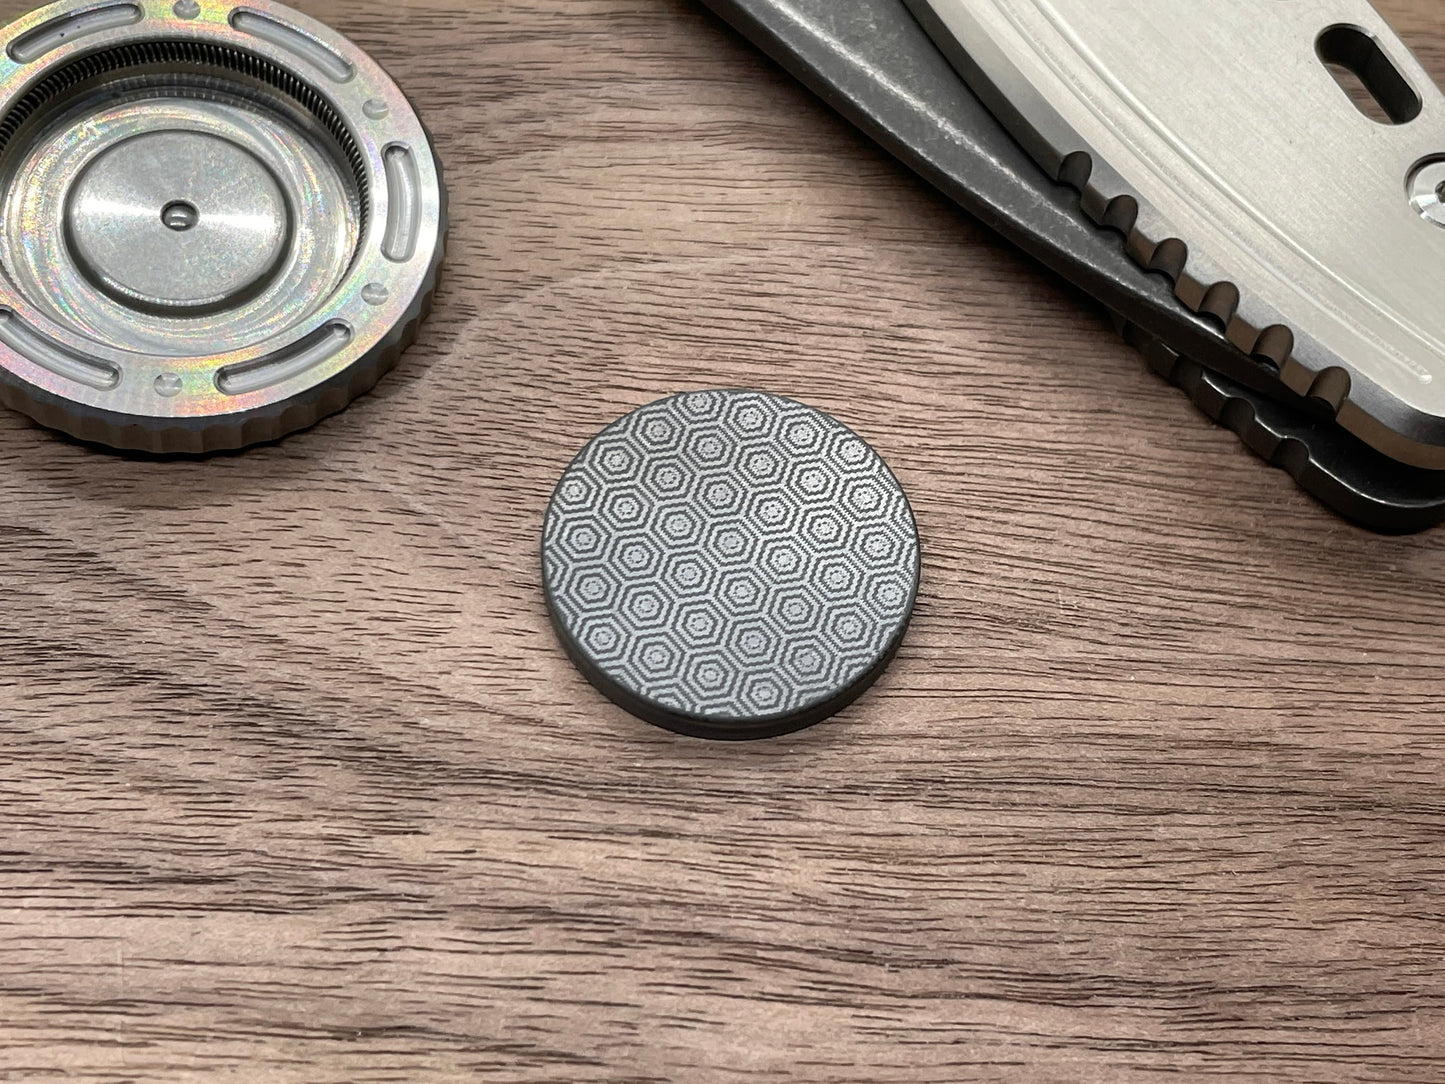 HONEYCOMB Black Tungsten Coin for Billetspin Gambit